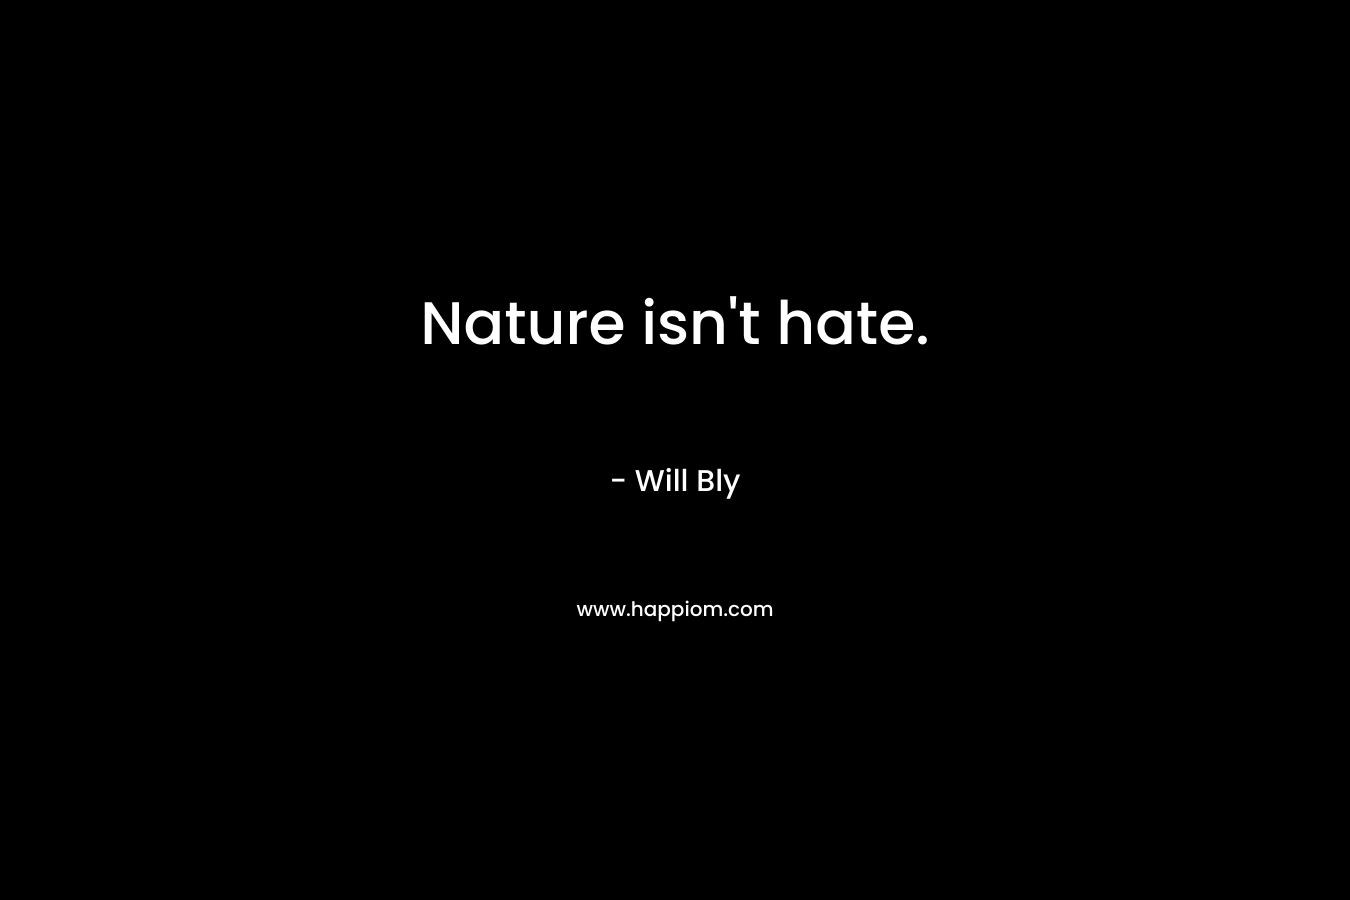 Nature isn’t hate. – Will Bly